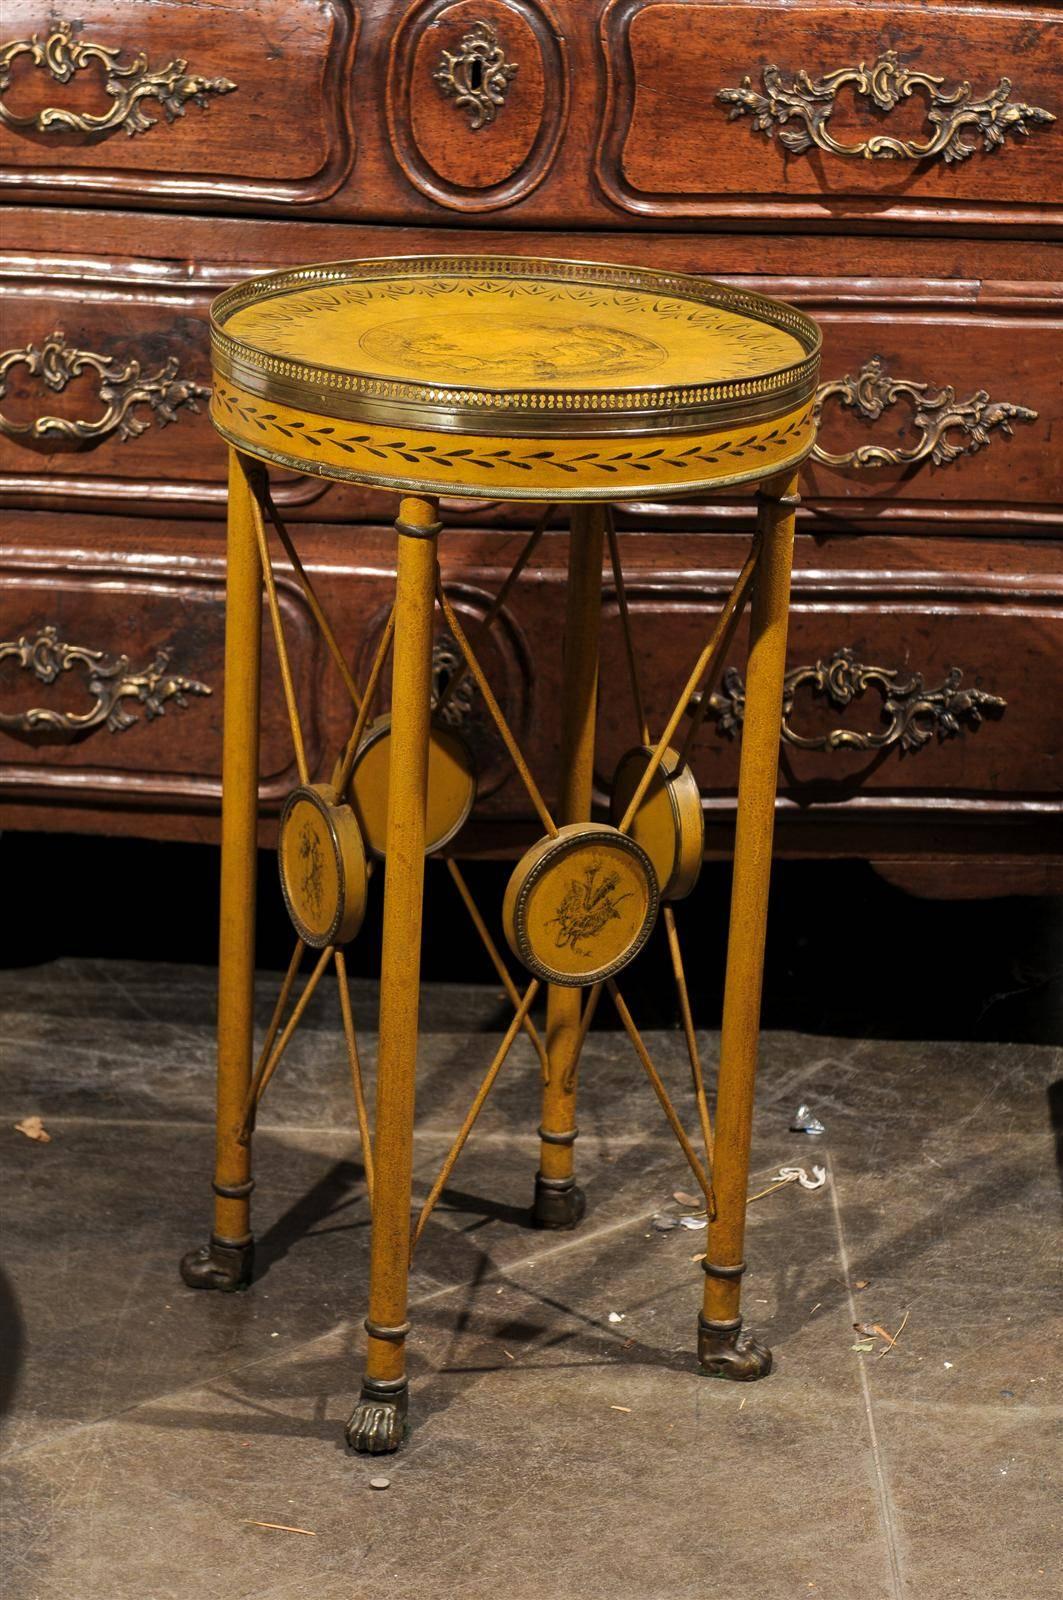 This French painted tole side table from the late 19th century features a circular top adorned with a pierced brass gallery on the surround and a delightful hand painted landscape scene in the center. The apron is adorned with floral motifs,